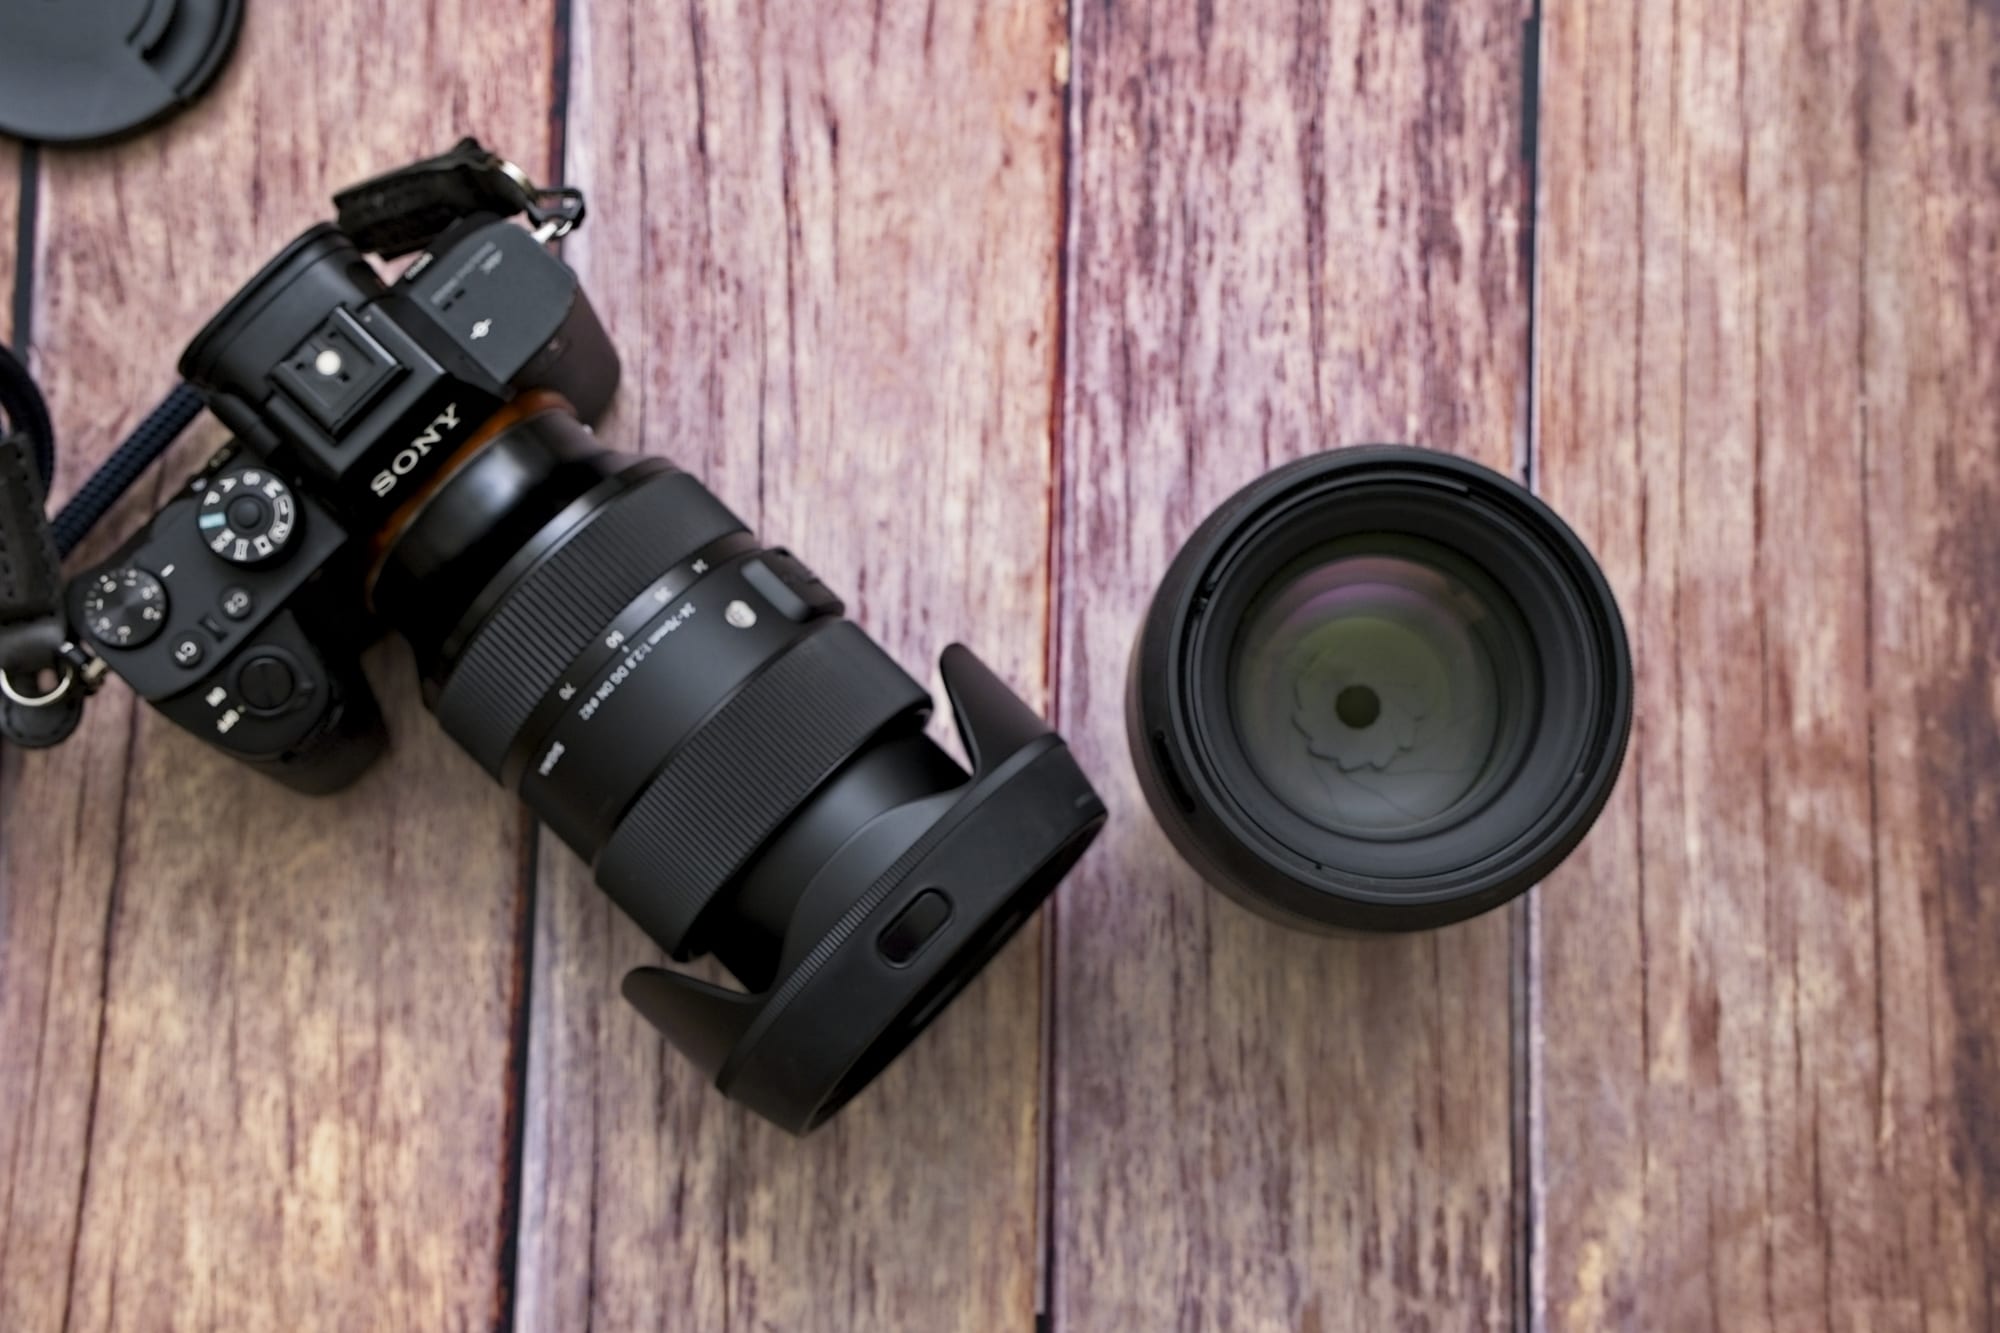 Sigma 24-70 F2.8 DG DN Art Lens Review and Specs